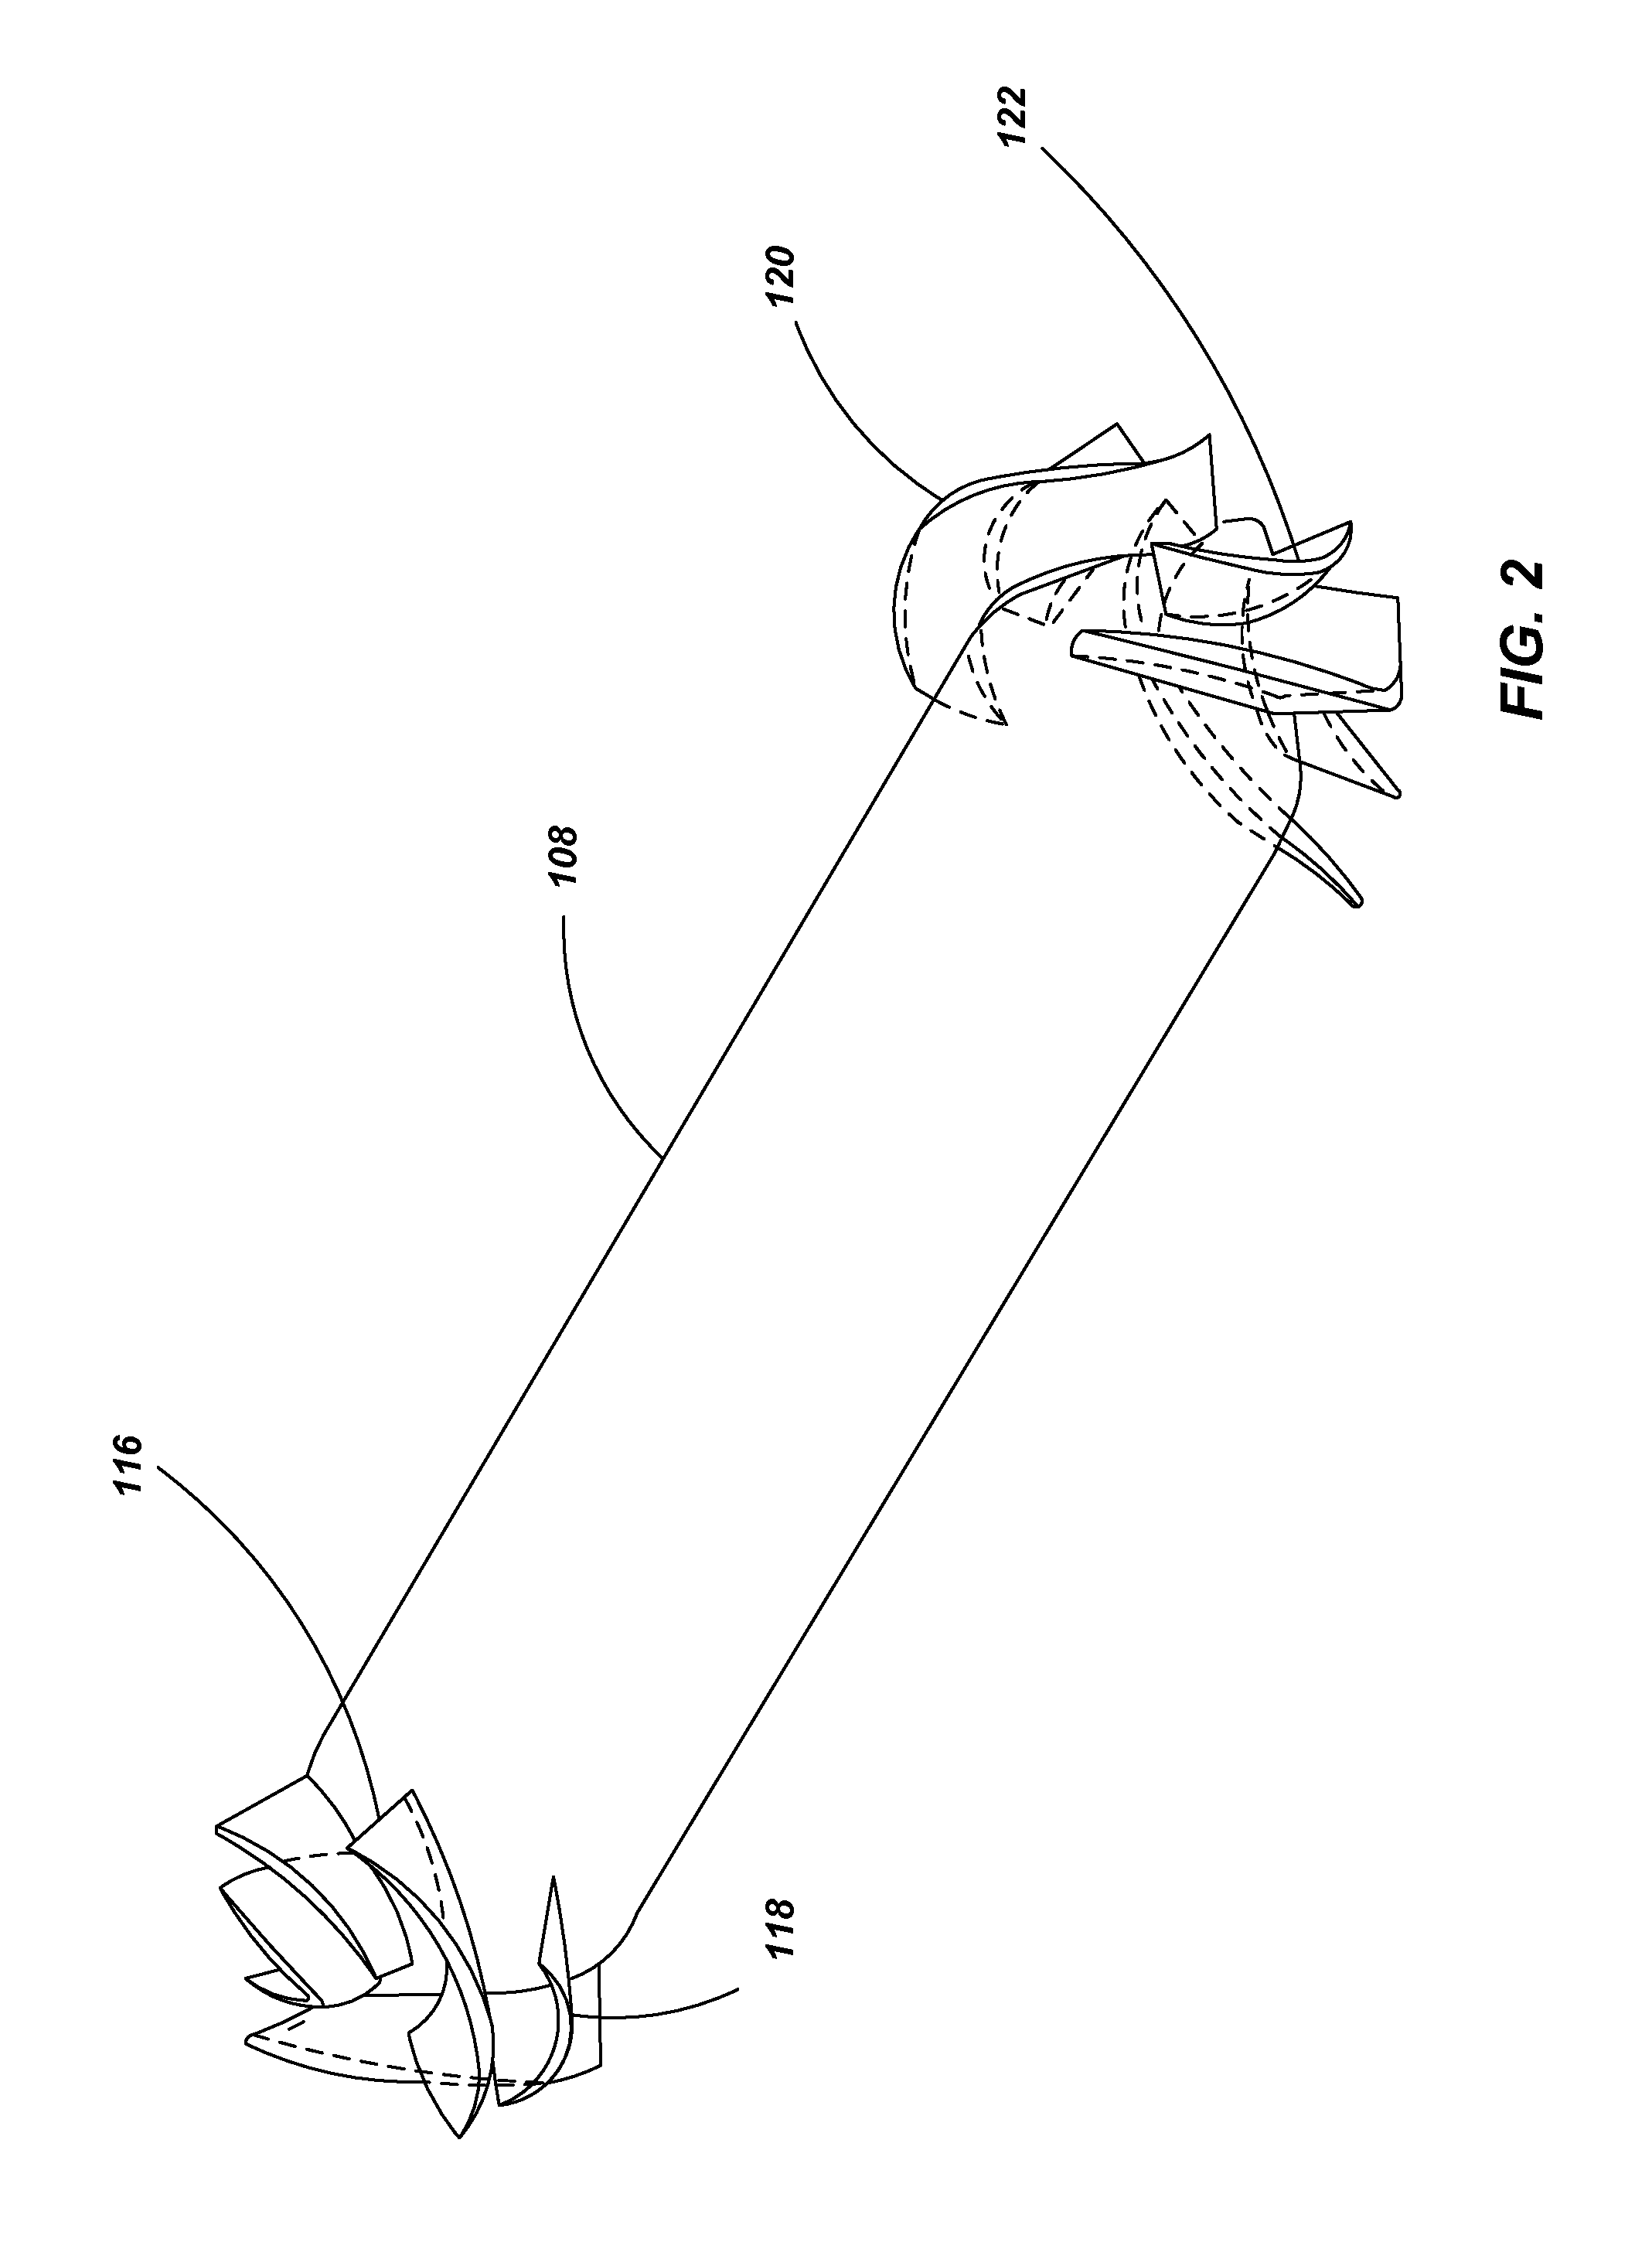 Blood pump with splitter impeller blades and splitter stator vanes and related methods